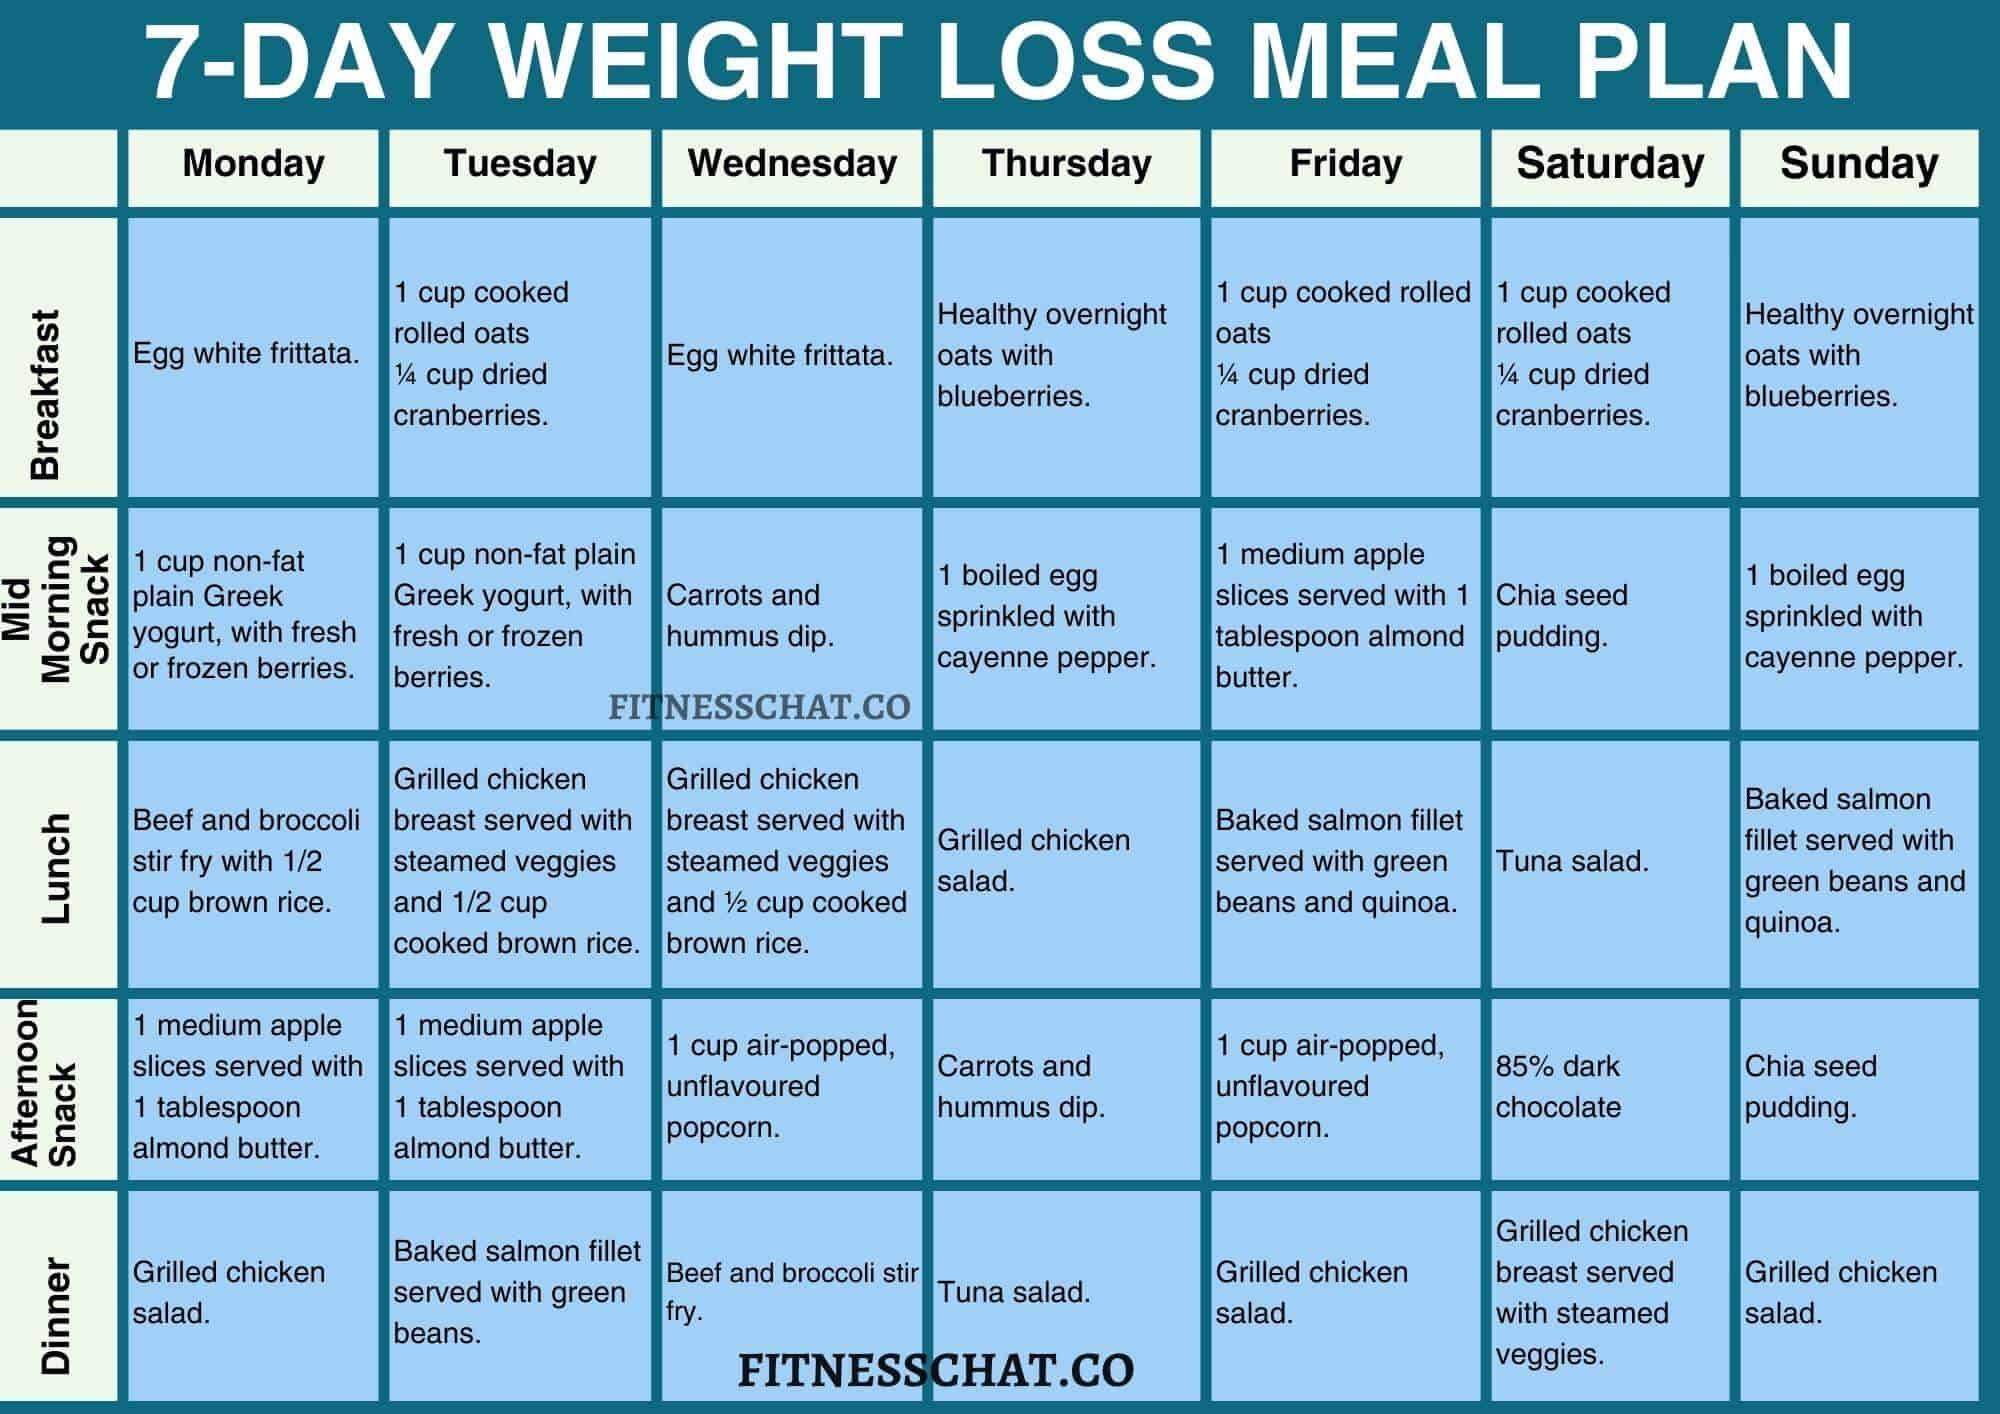 FREE 7-day weight loss meal plan for weight loss with grocery list